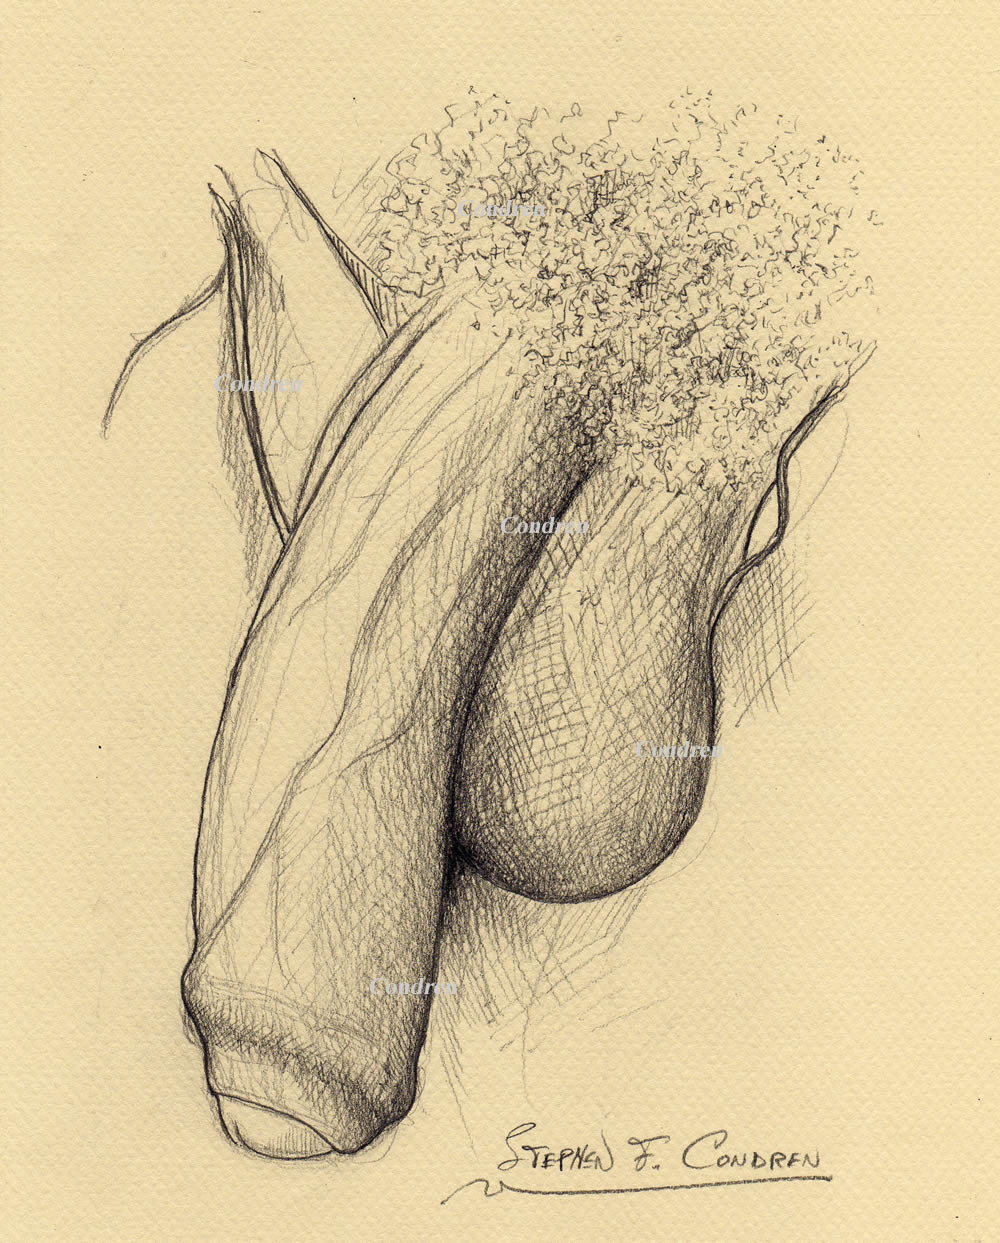 Penis #522Z, sex organ pencil drawing with prints & scans, by artist Stephen F. Condren of Condren Galleries, with gay LGBTQ approved prints, and scans.